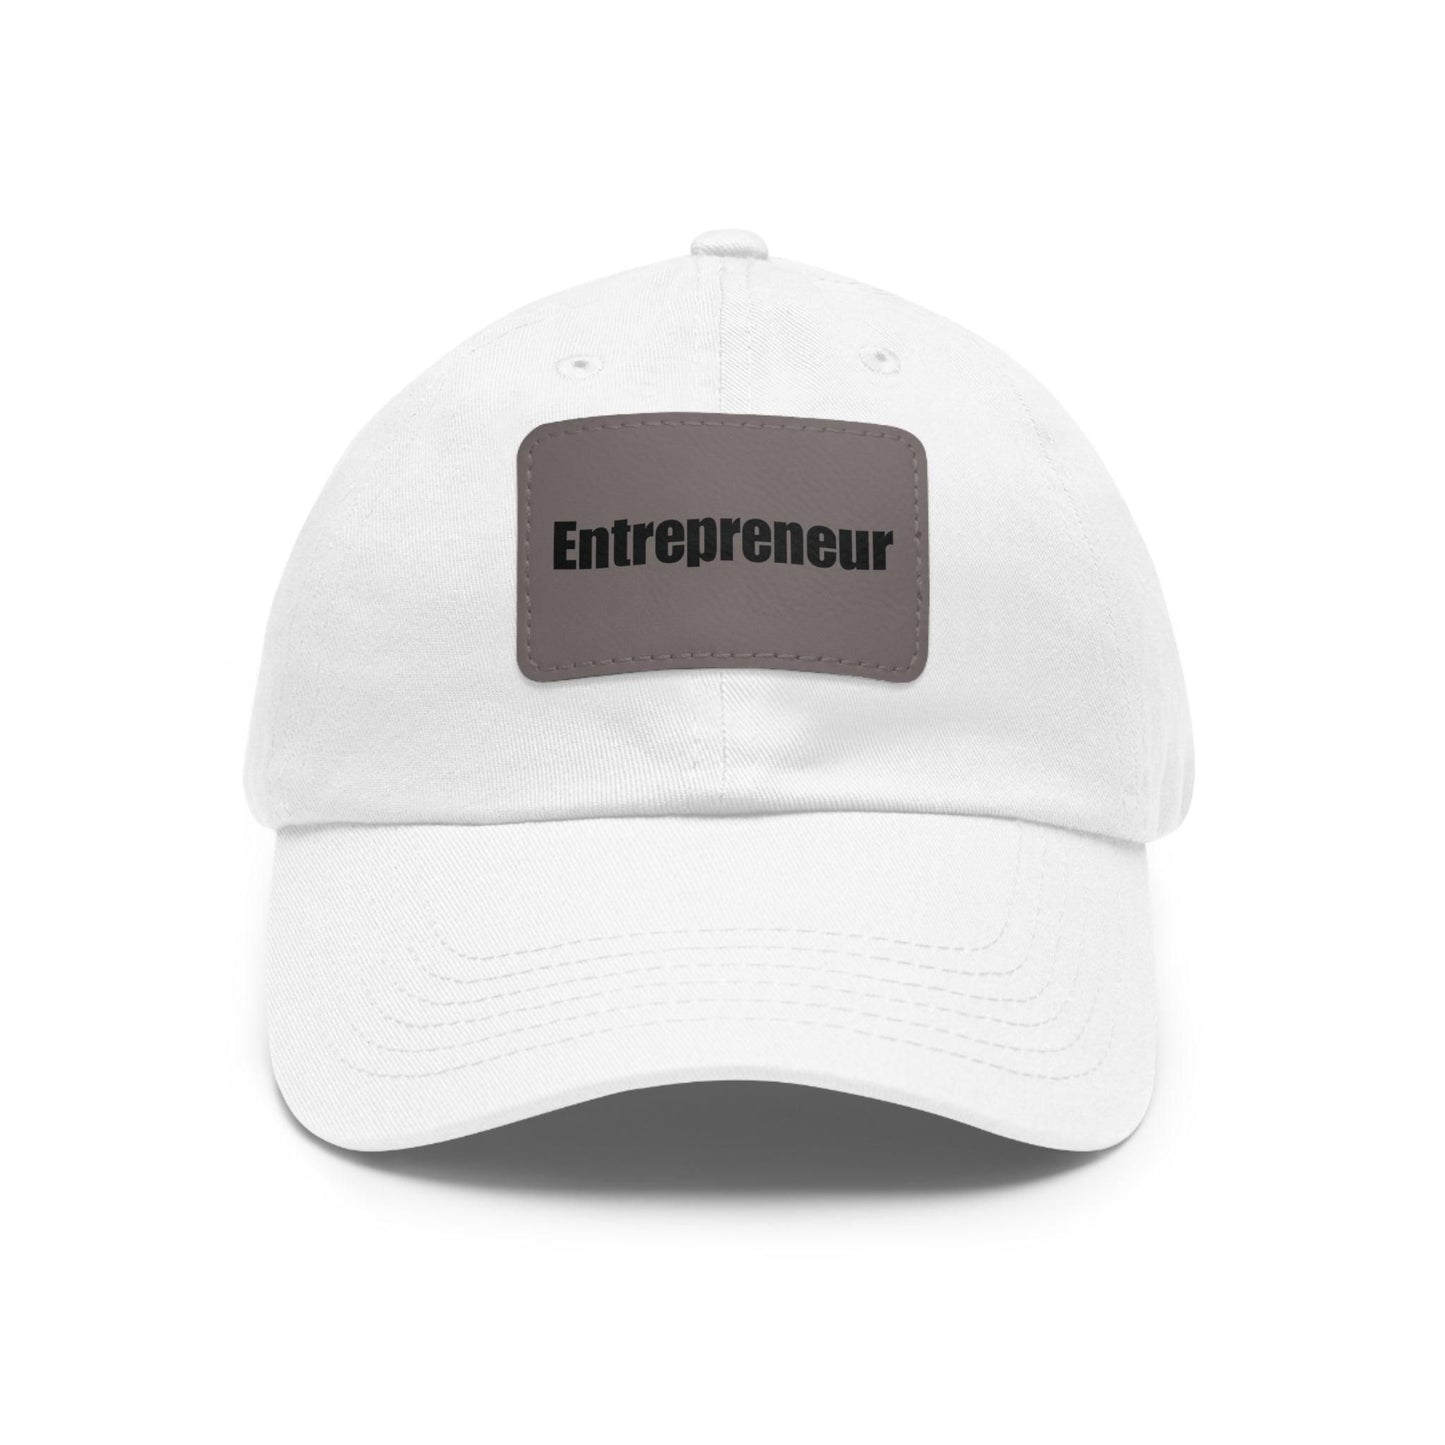 Entrepreneur Baseball Hat with Leather Patch Cap White / Grey patch Rectangle One size